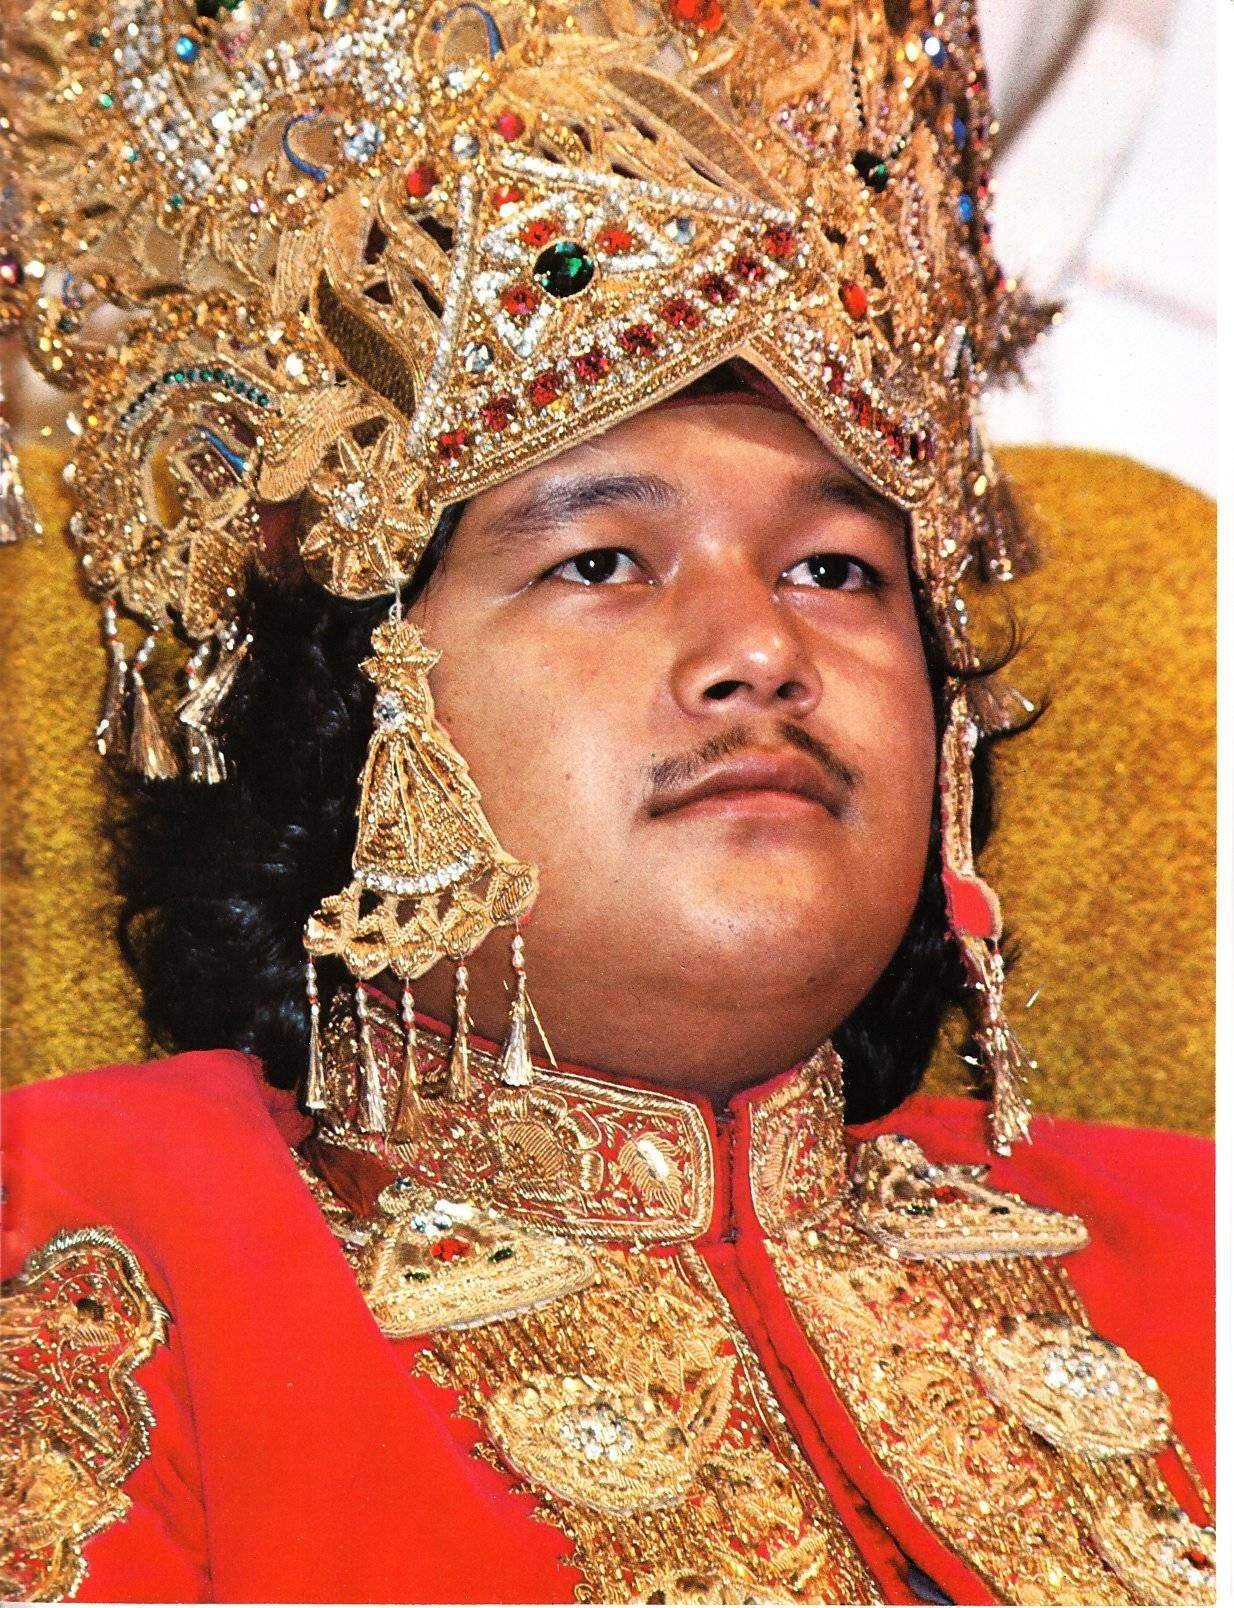 The young Prem Rawat (Maharaji) dressed as Krishna With Crown